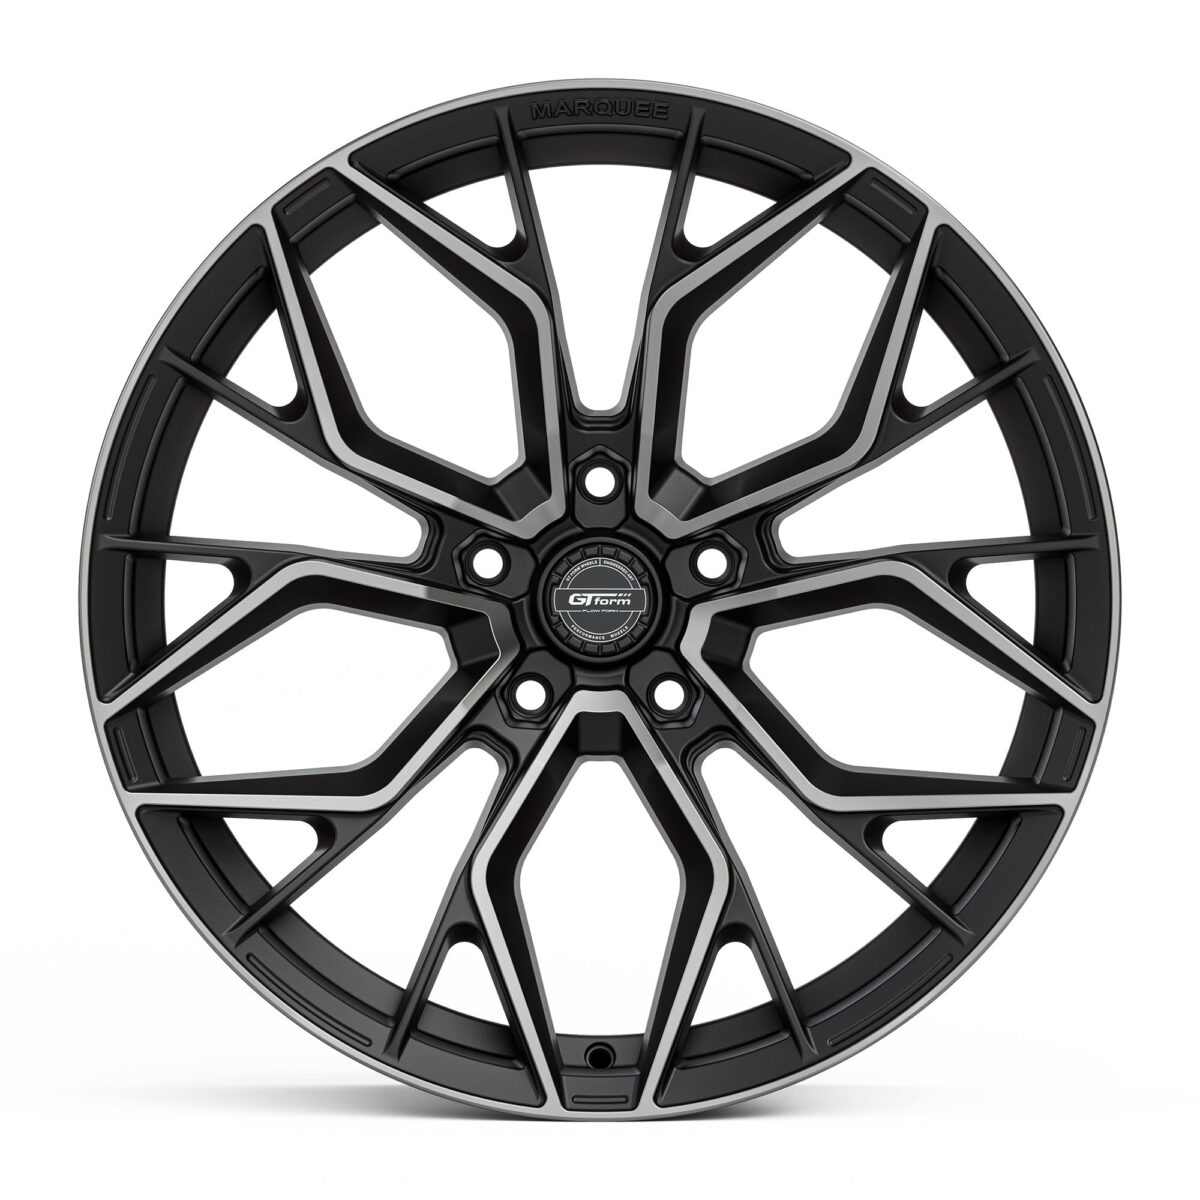 GT Form Marquee Matte Black Grey Tint Staggered Rims 22 inch Performance Wheels